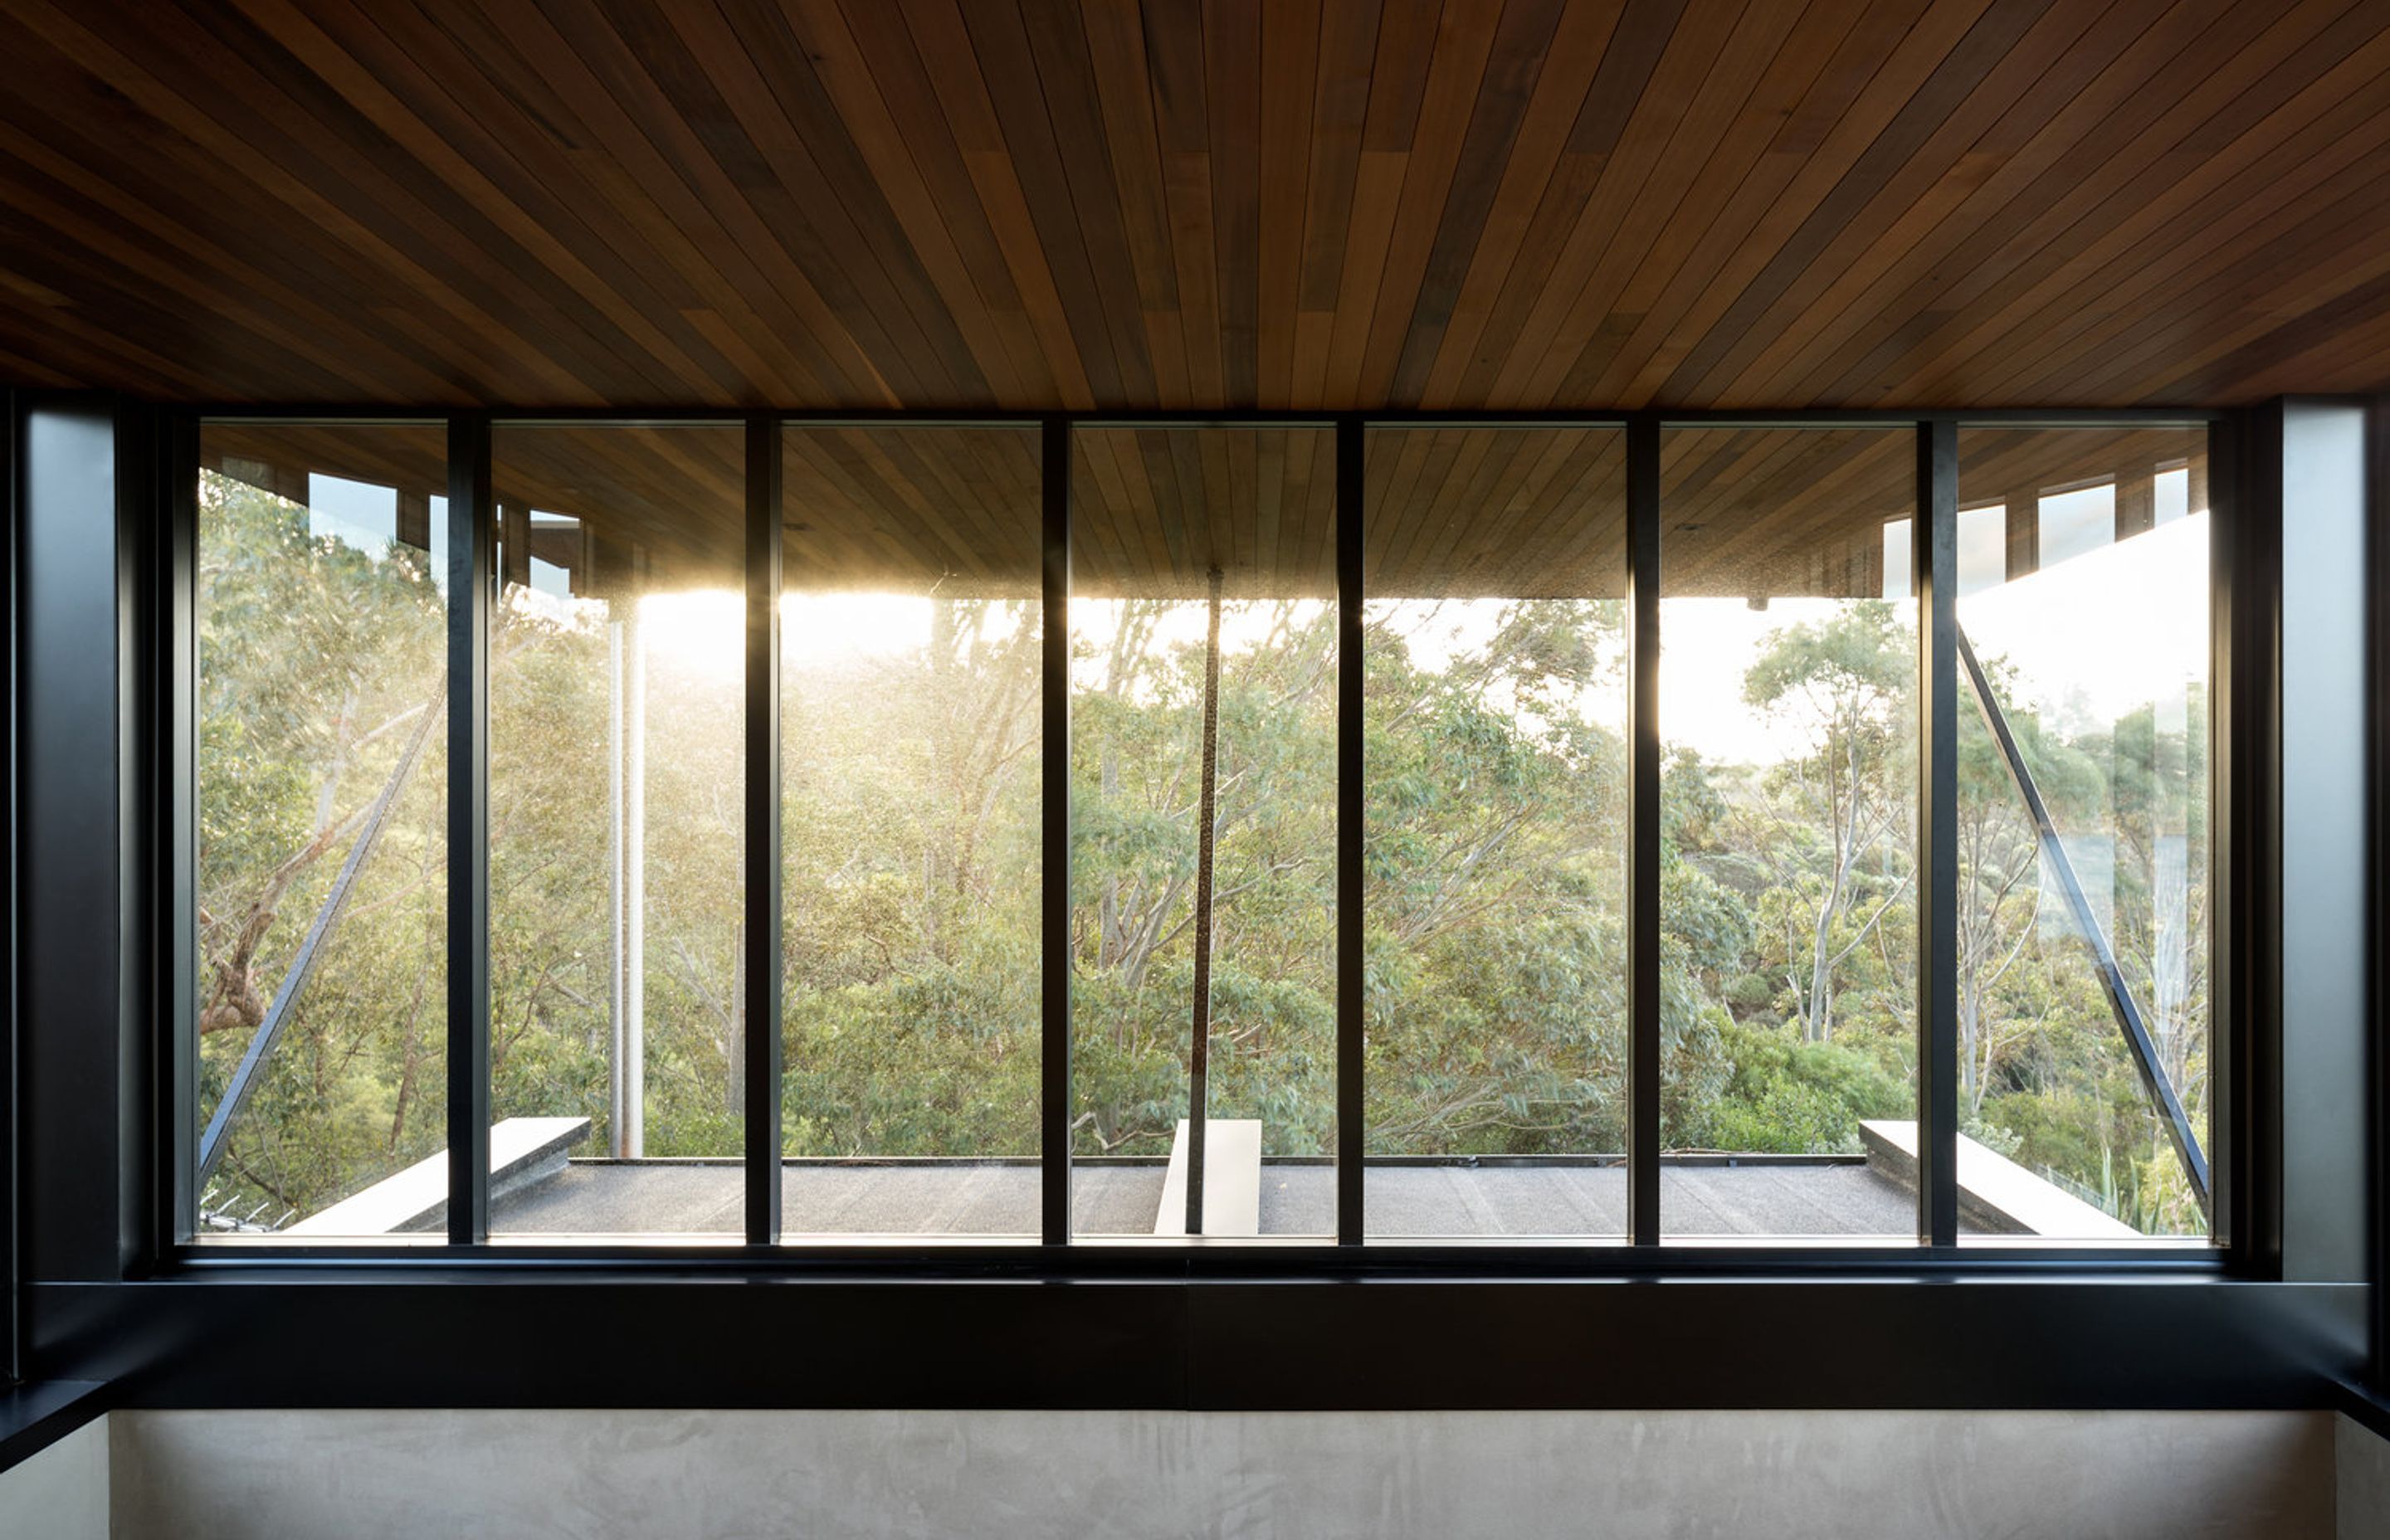 The master bedroom has a sliding window that opens up and looks north under an overhanging eave to the treetops.